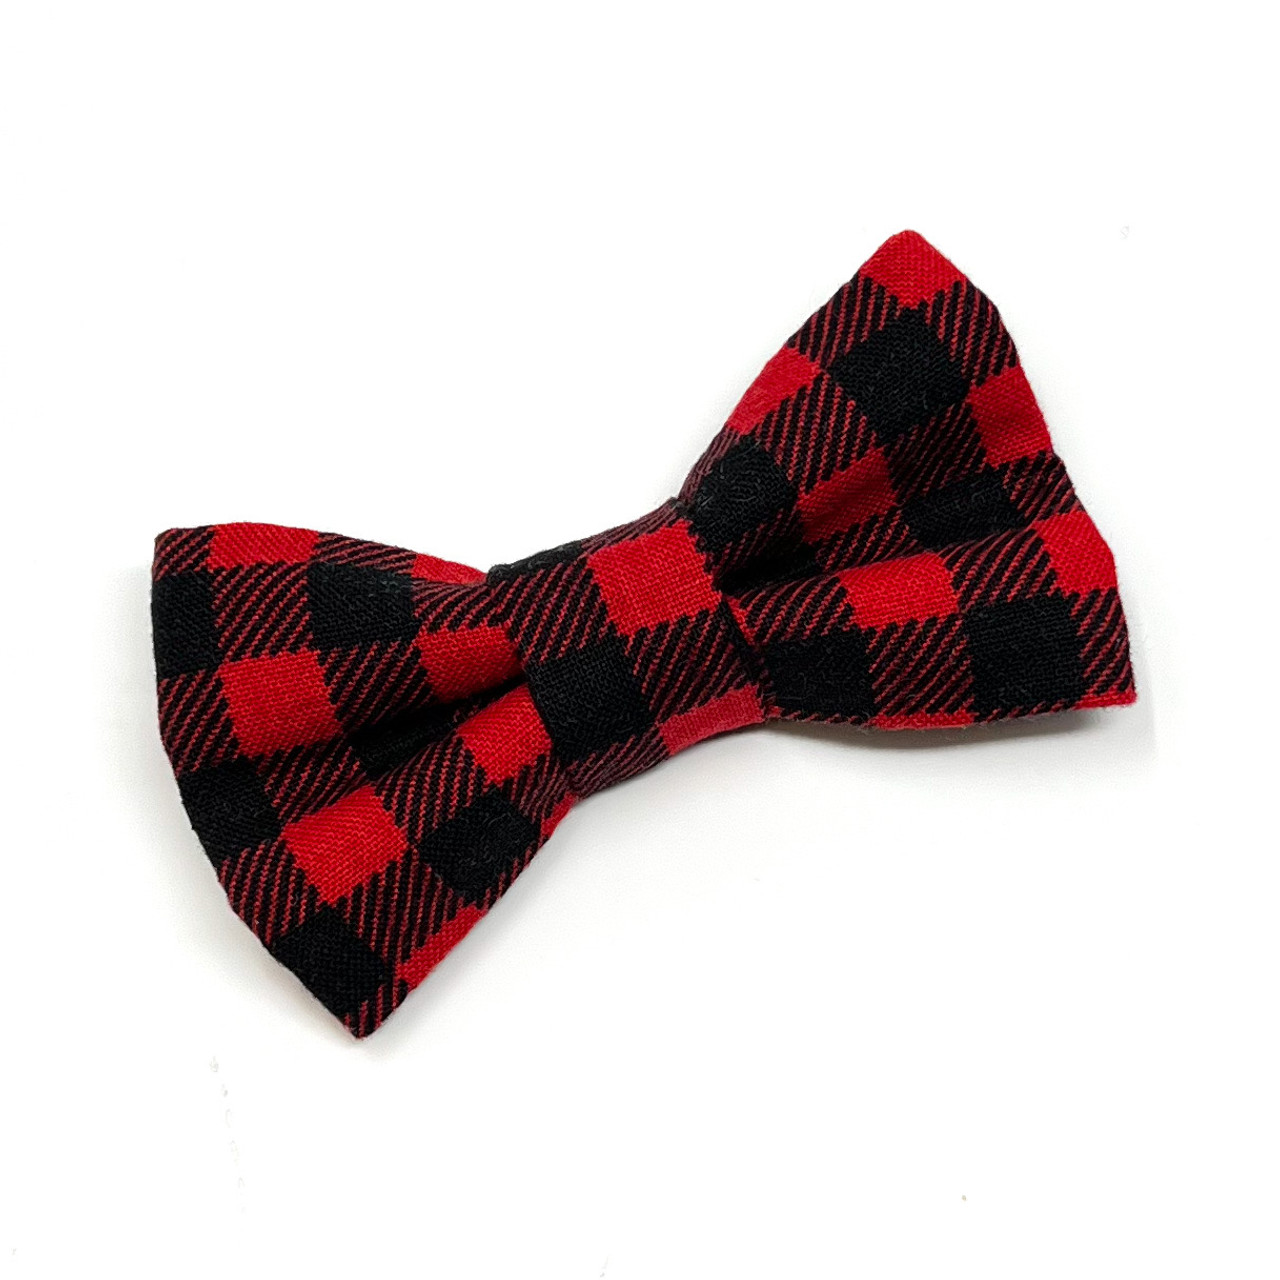 Red and black buffalo plaid bow tie